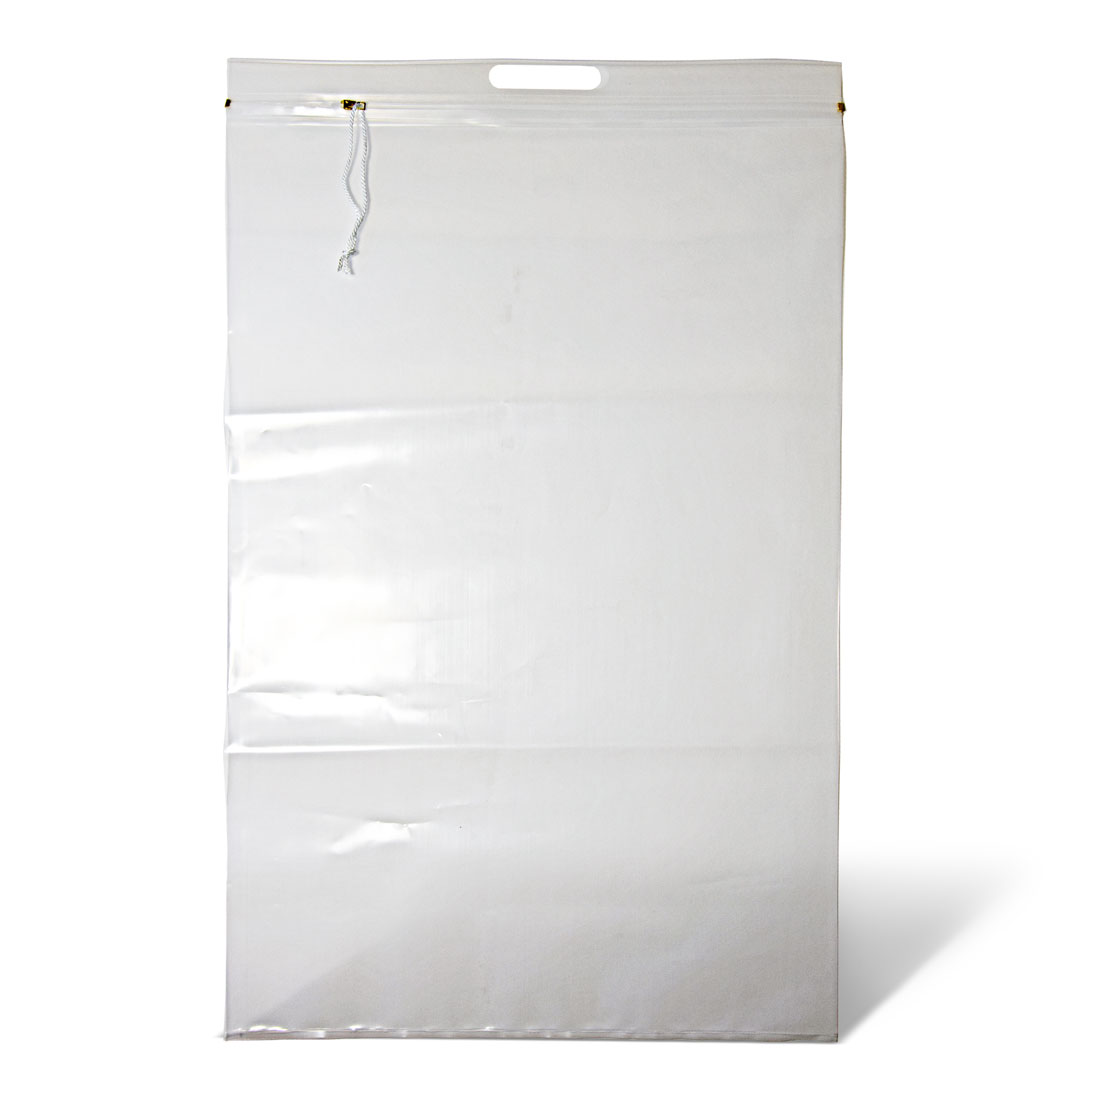 Carry bag for hazardous material for extractor (class H)